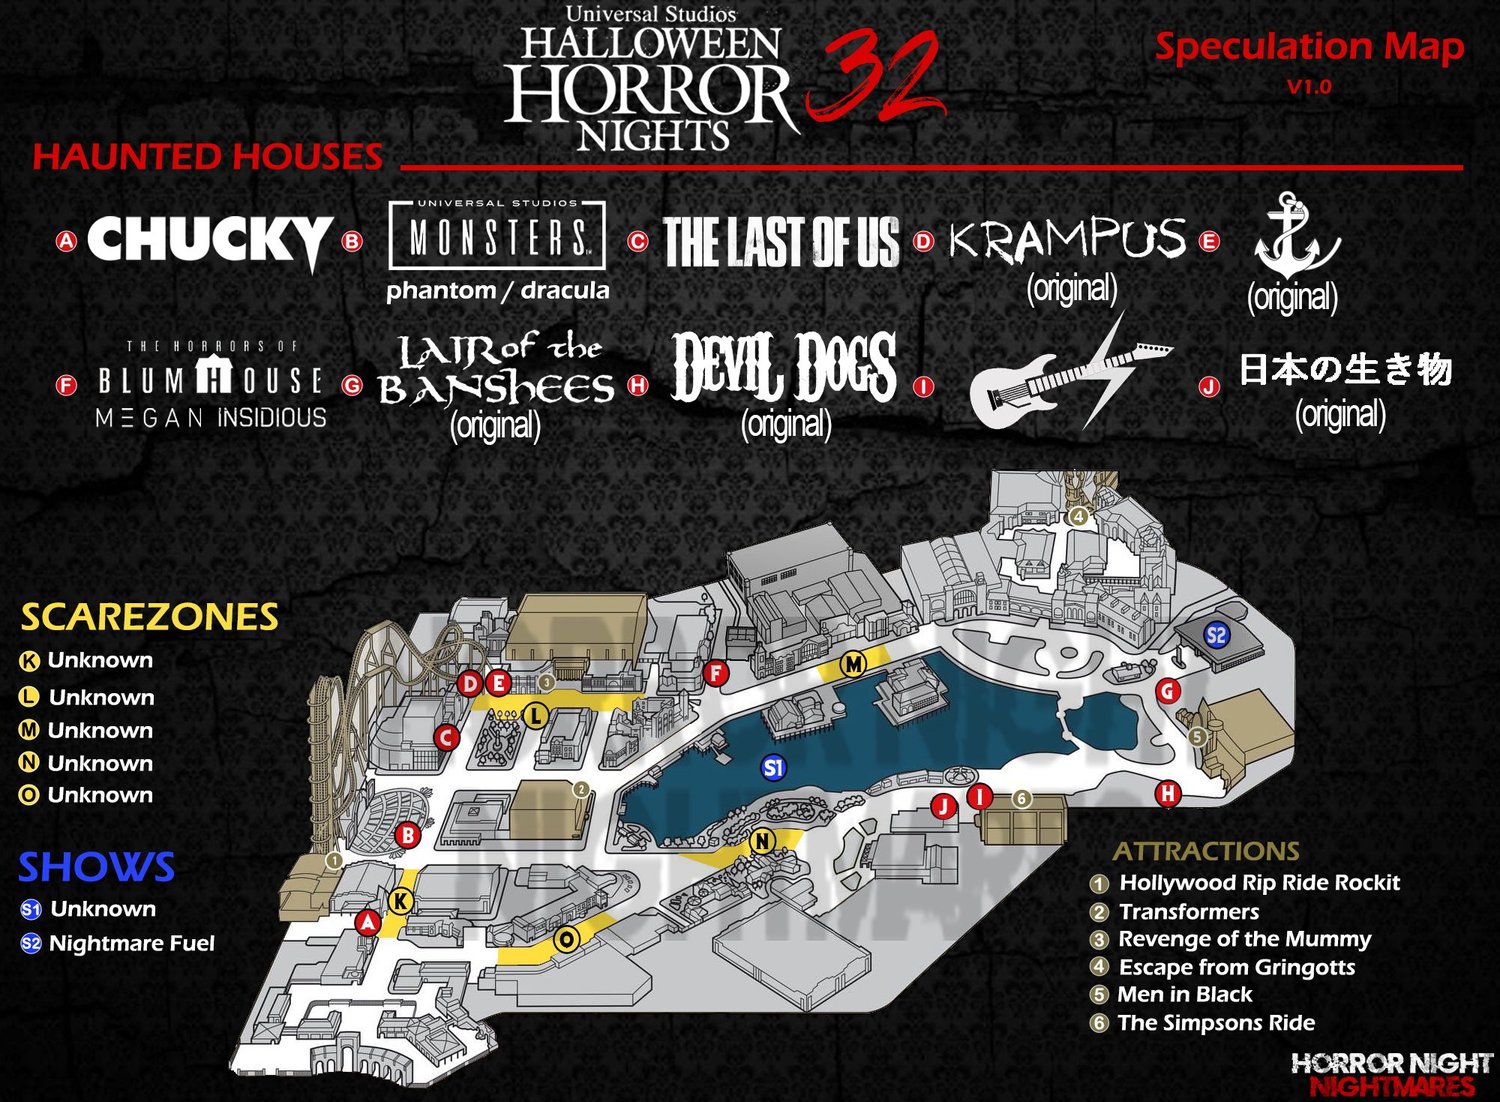 Halloween Horror Nights 2023 Speculation Map Arrives! — The Drop Network